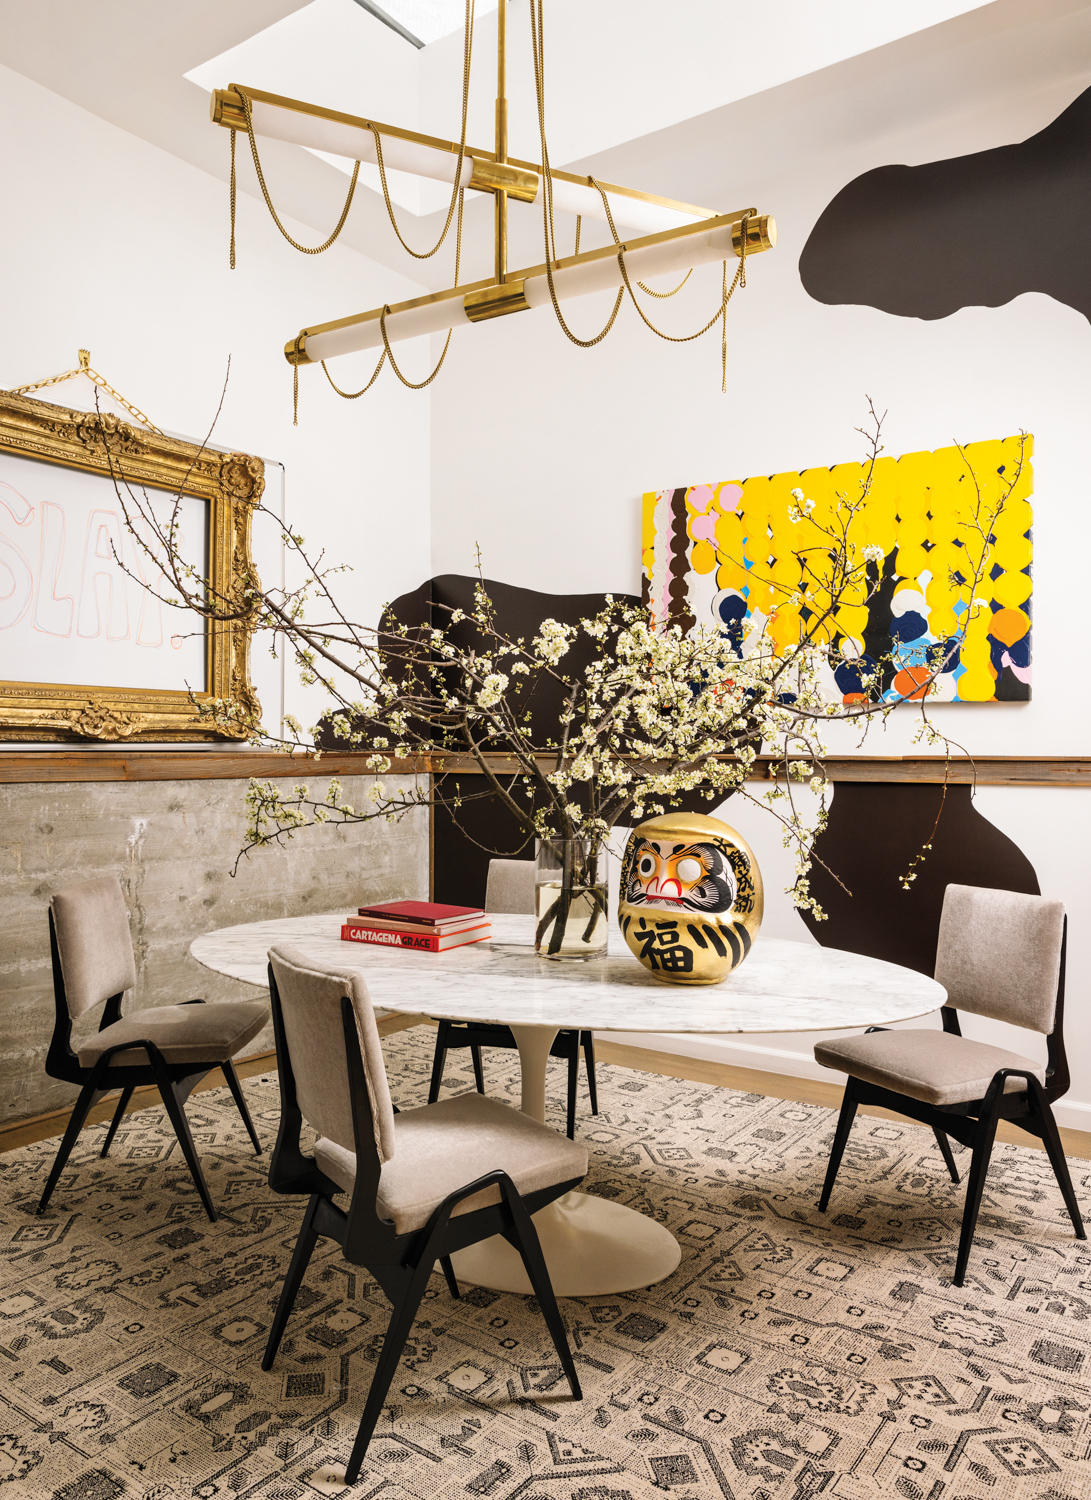 Dining room with upholstered chairs, marble oval table and gold chandelier with chain accents